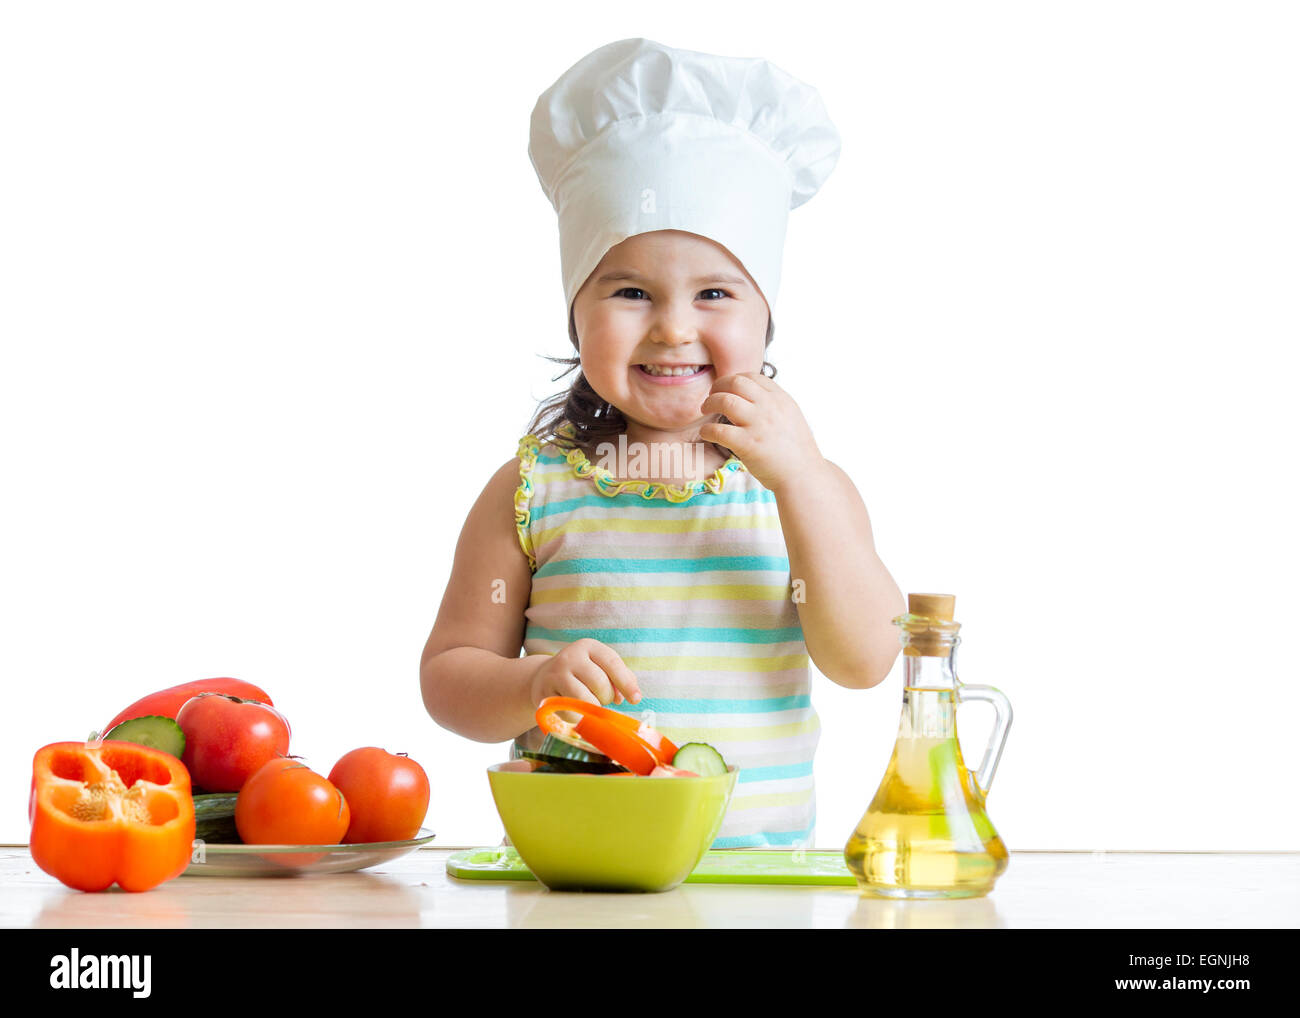 child preparing healthy food in the kitchen Stock Photo